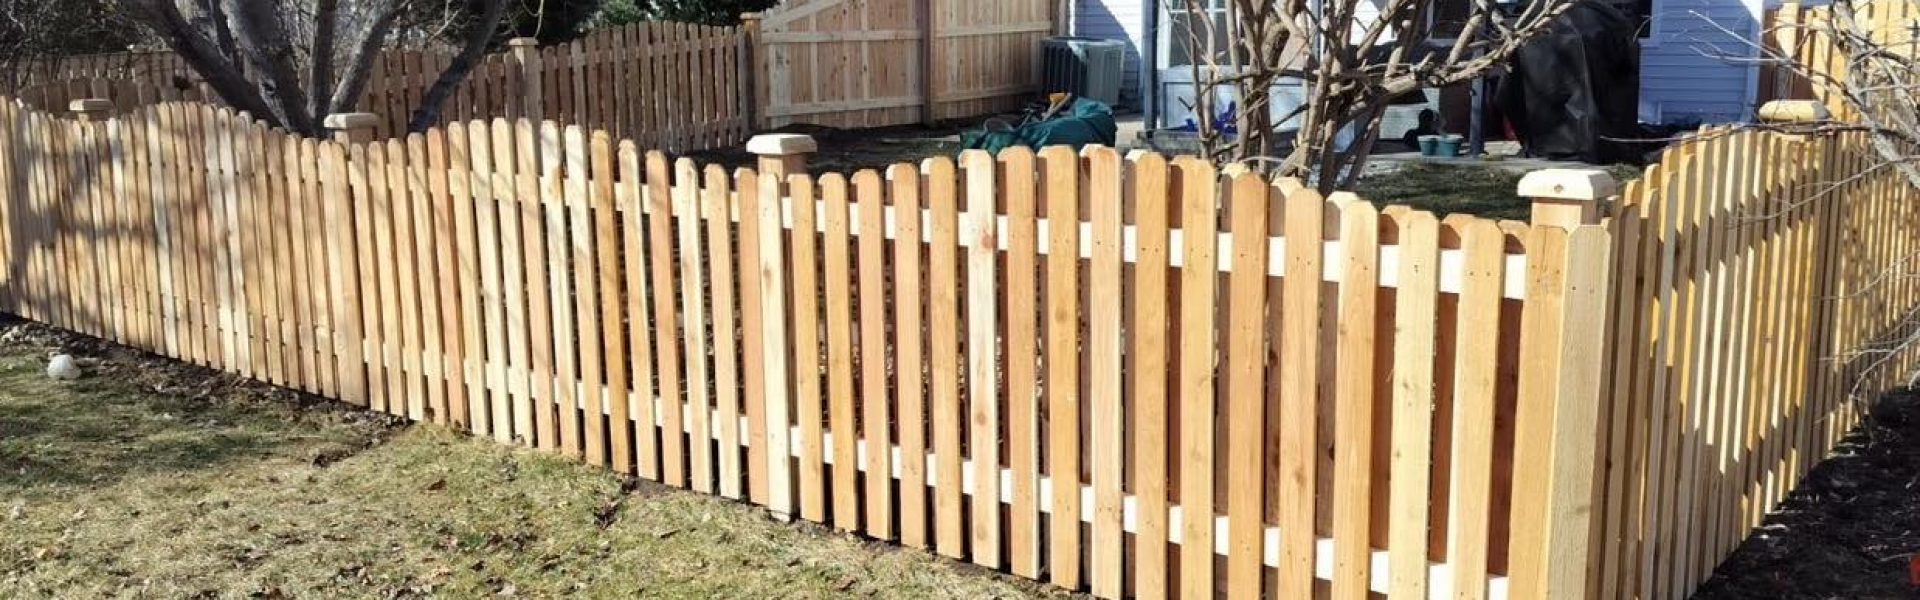 Cedar Fence with Rounded Top